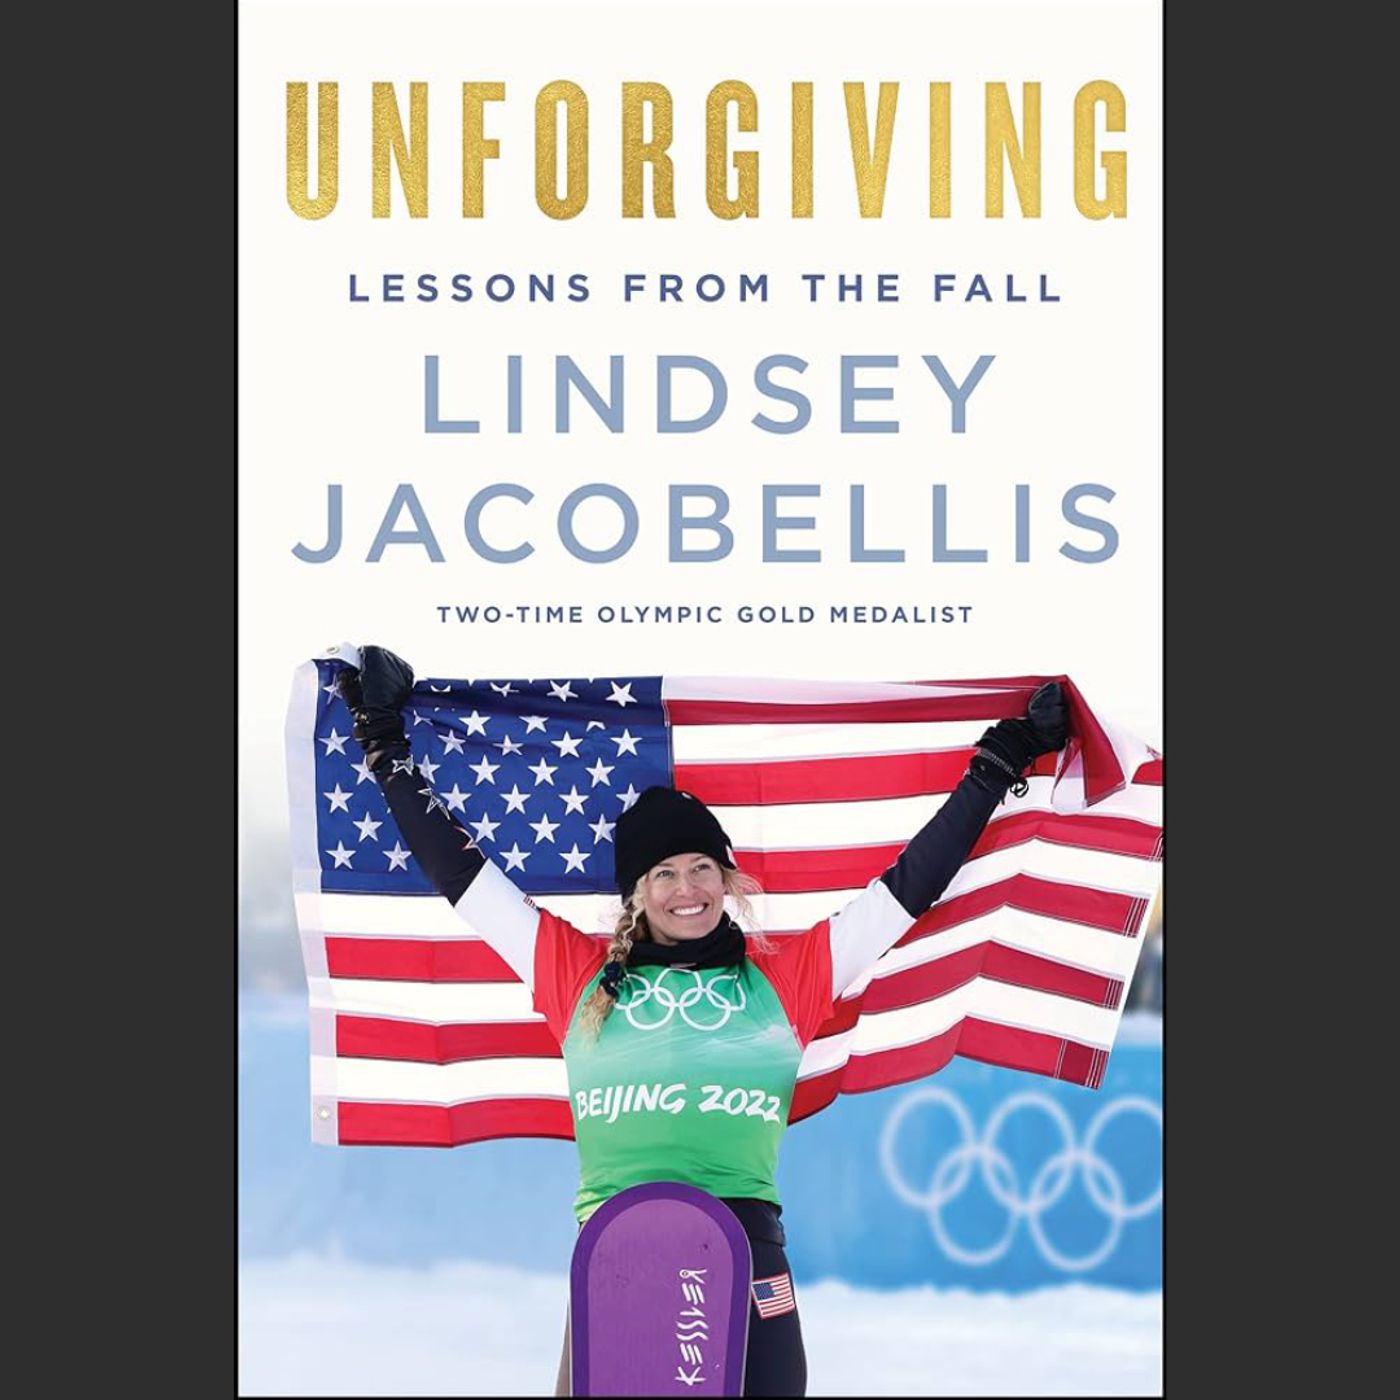 2x Olympic gold medalist Lindsey Jacobellis, author of Unforgiving: Lessons from the Fall